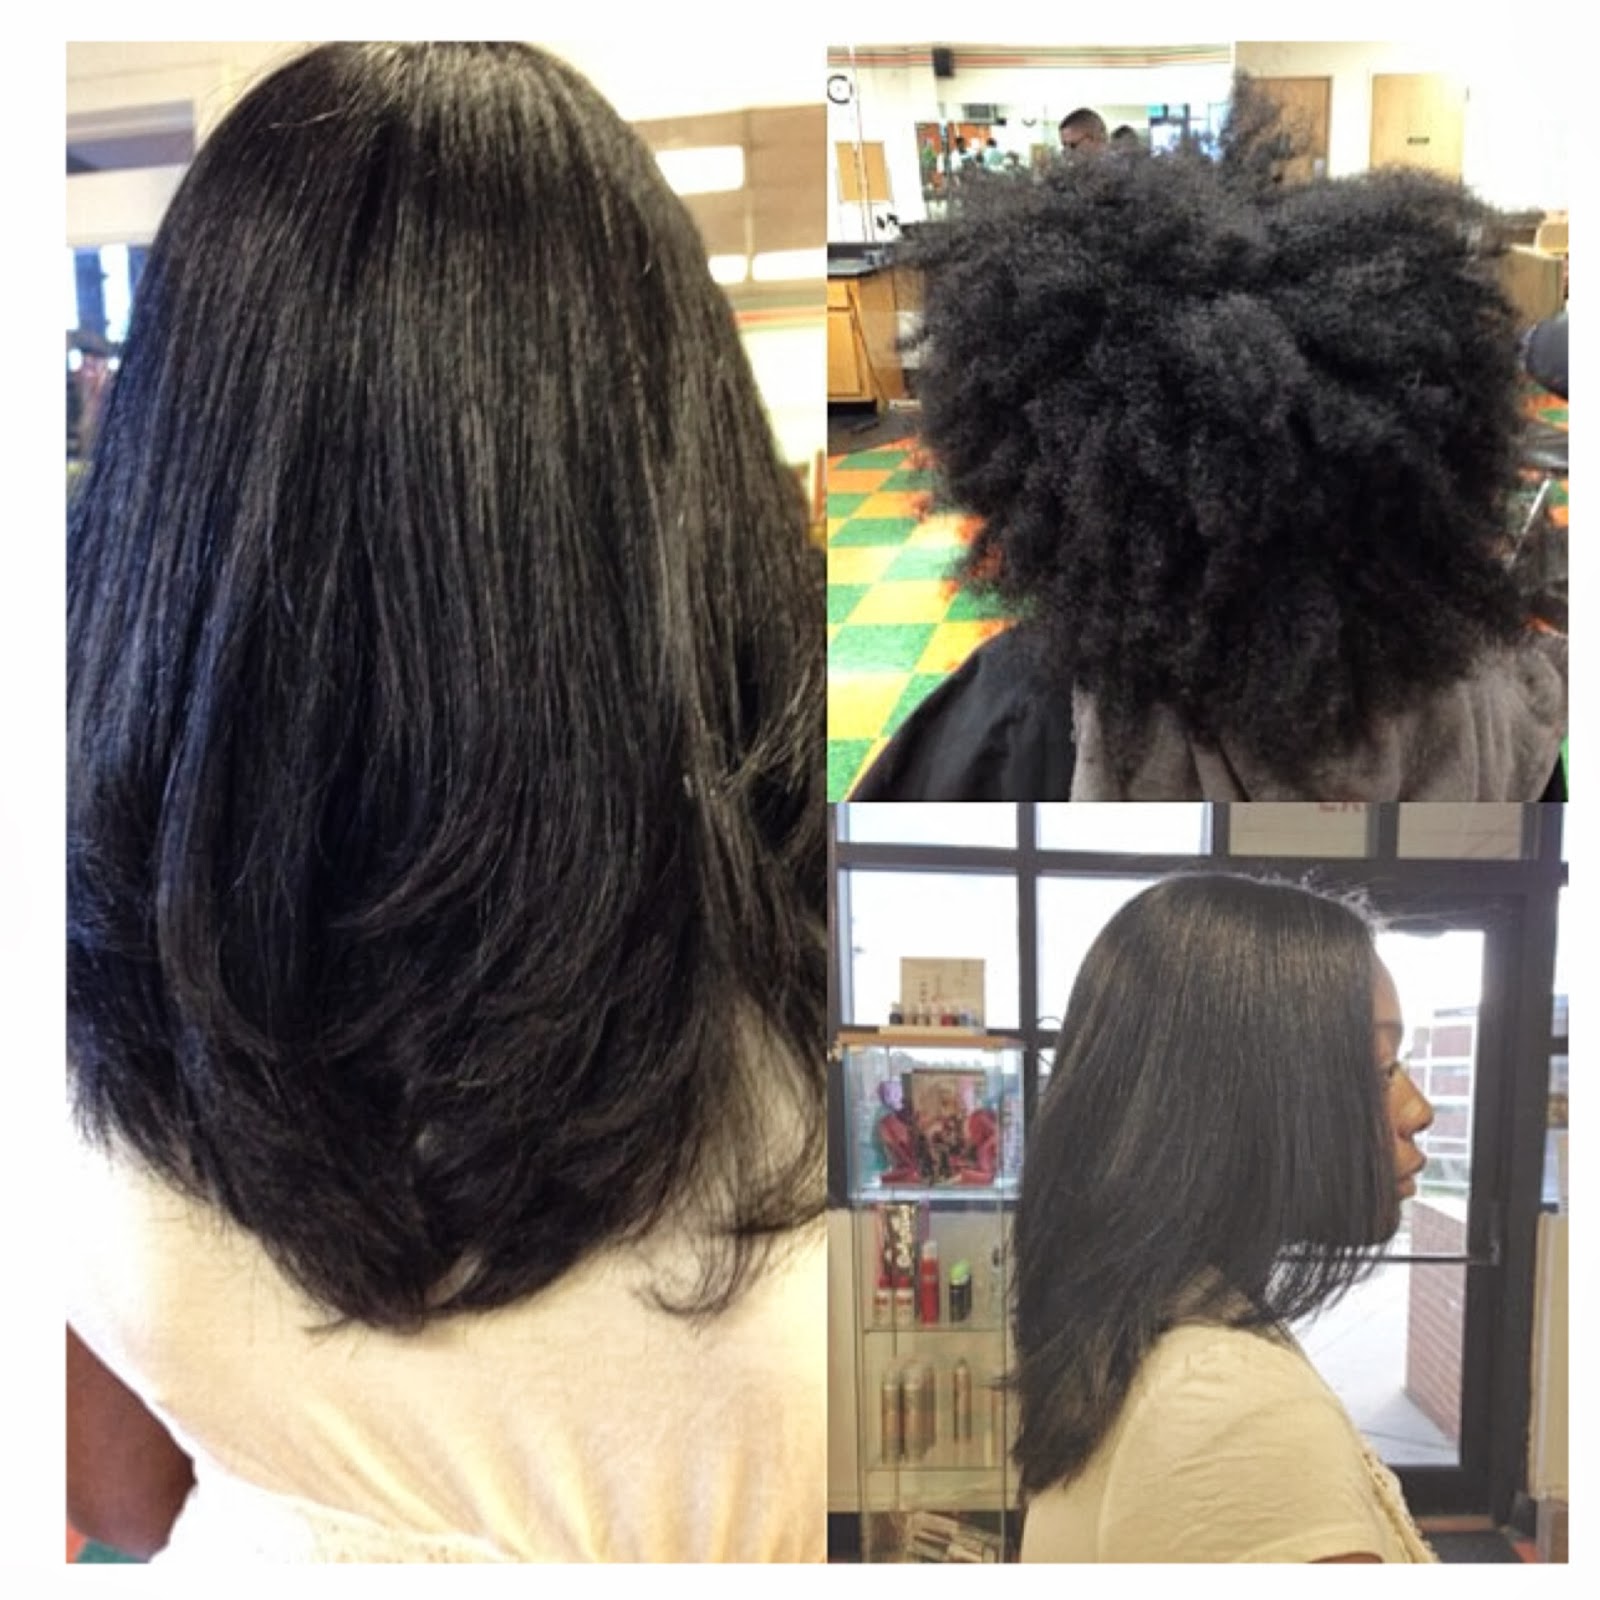 Natural Hairstyles After Blowout